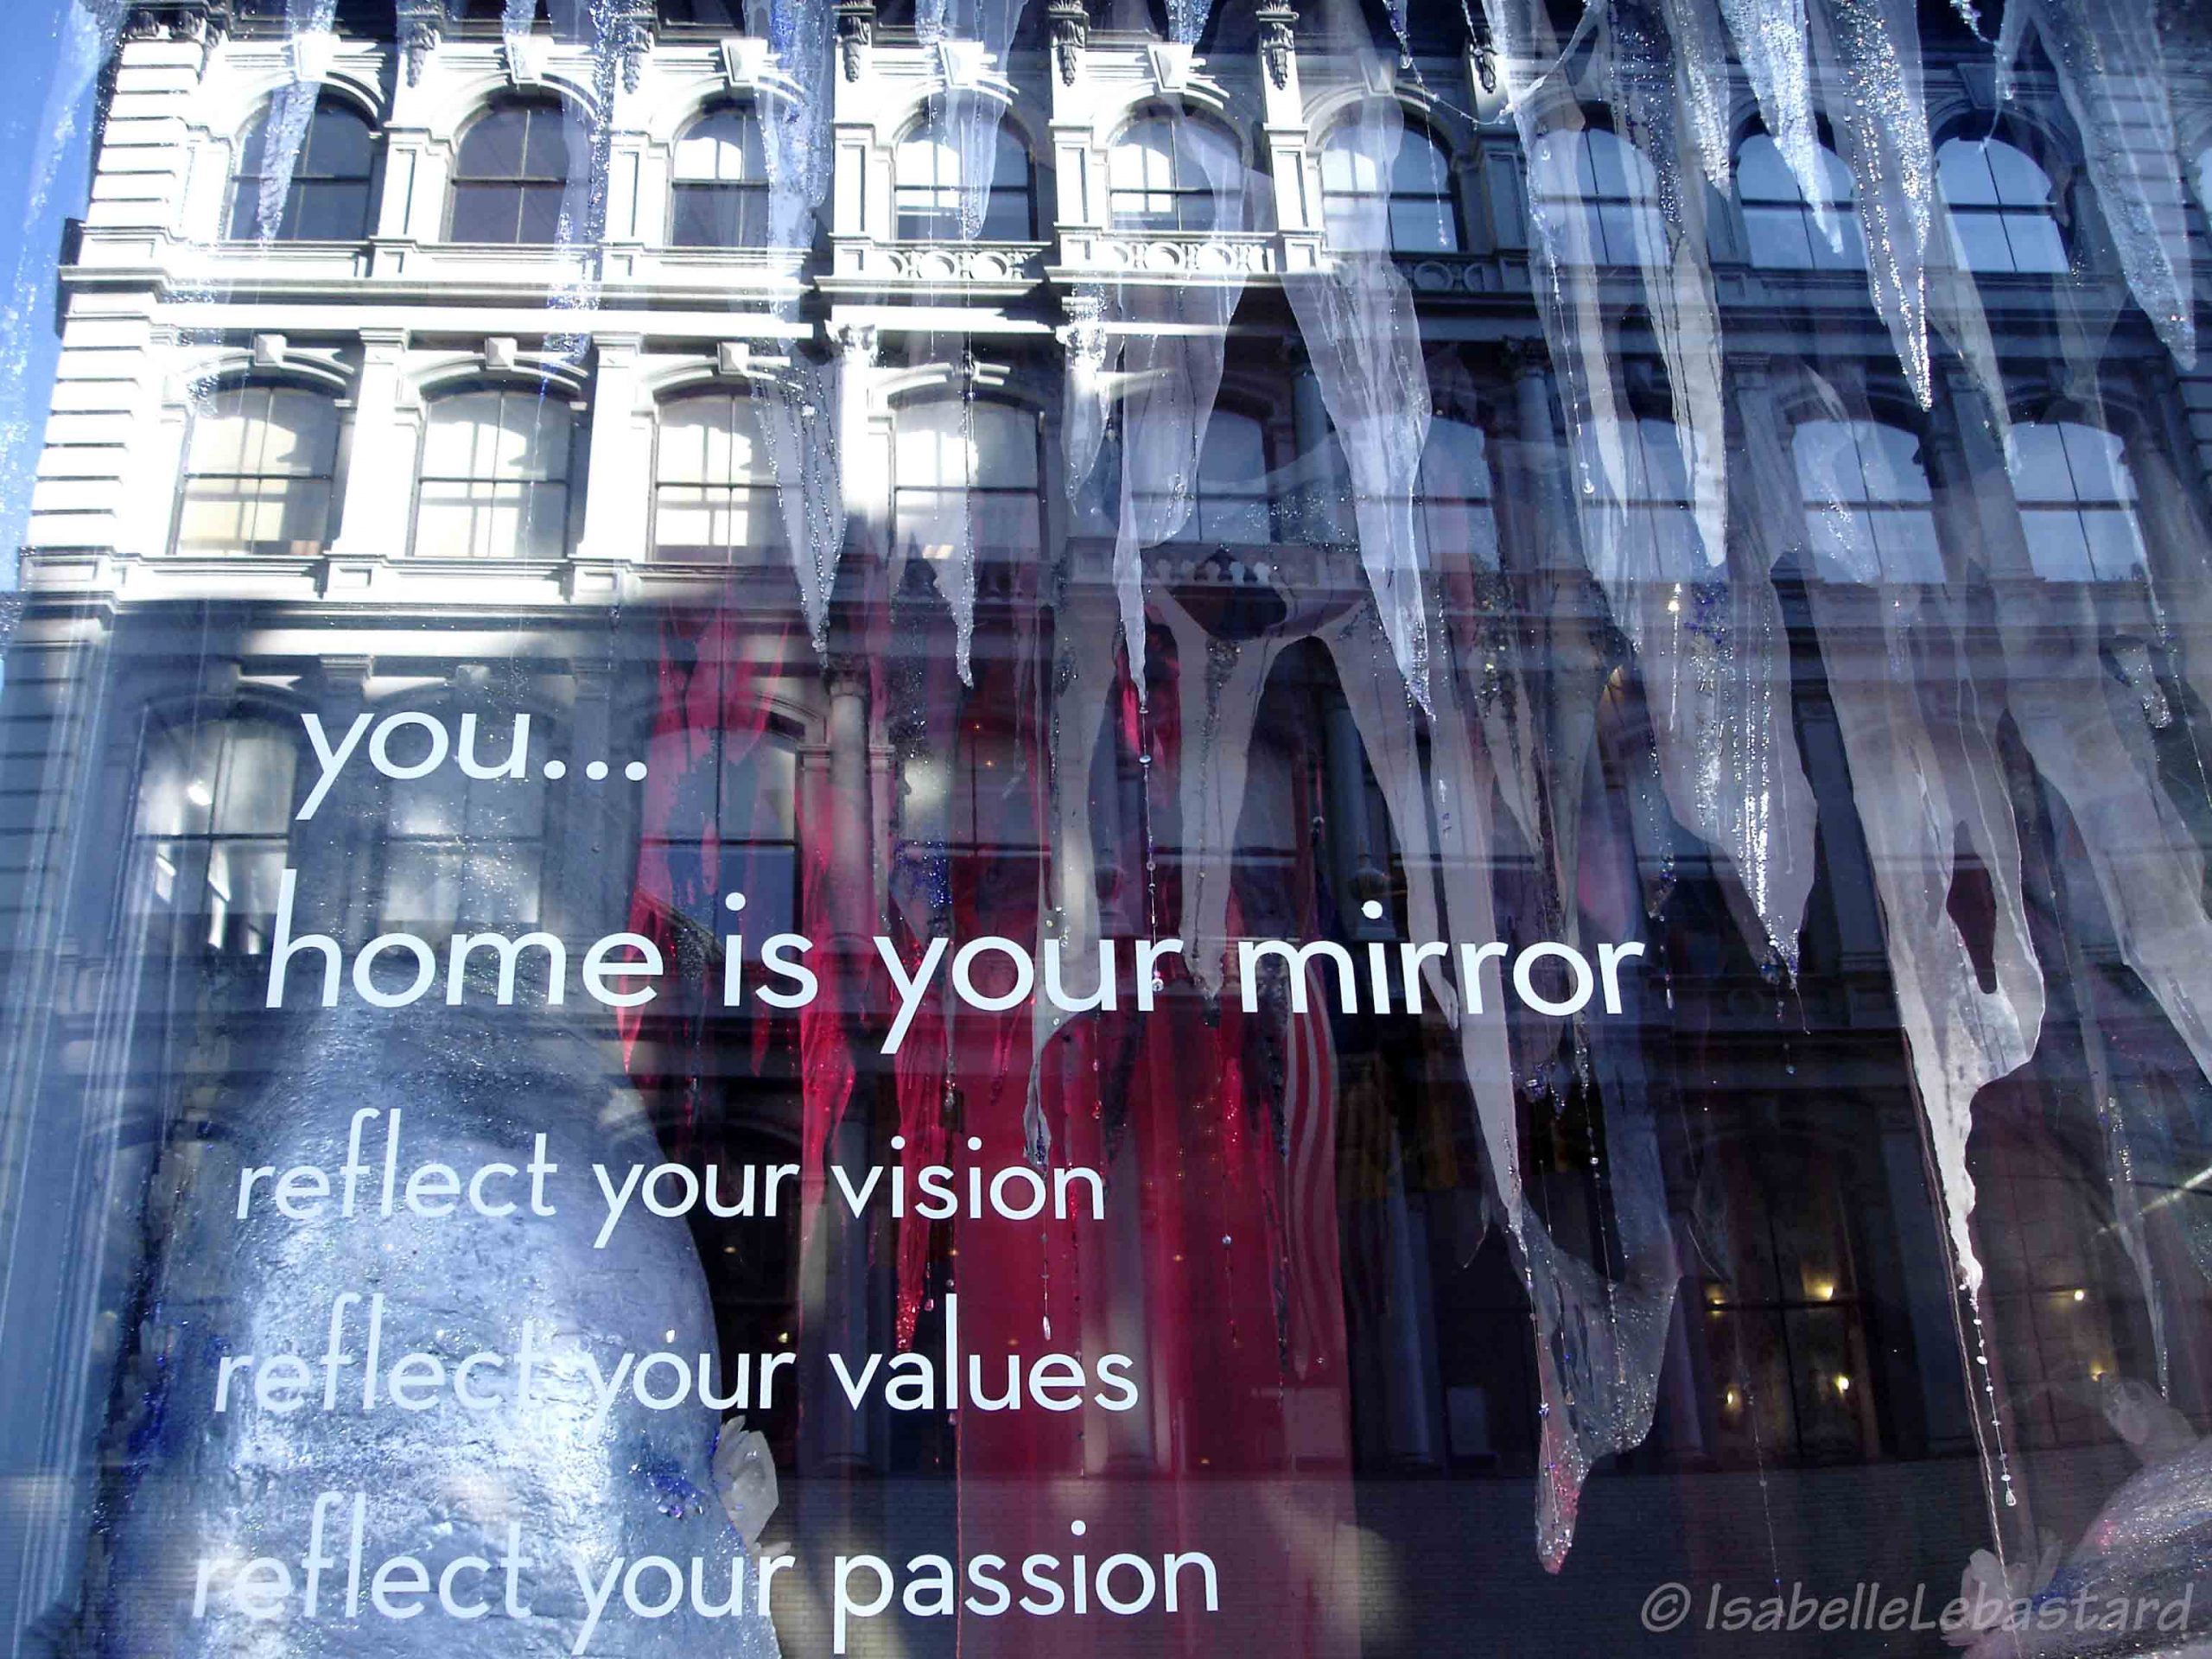 Home is your mirror